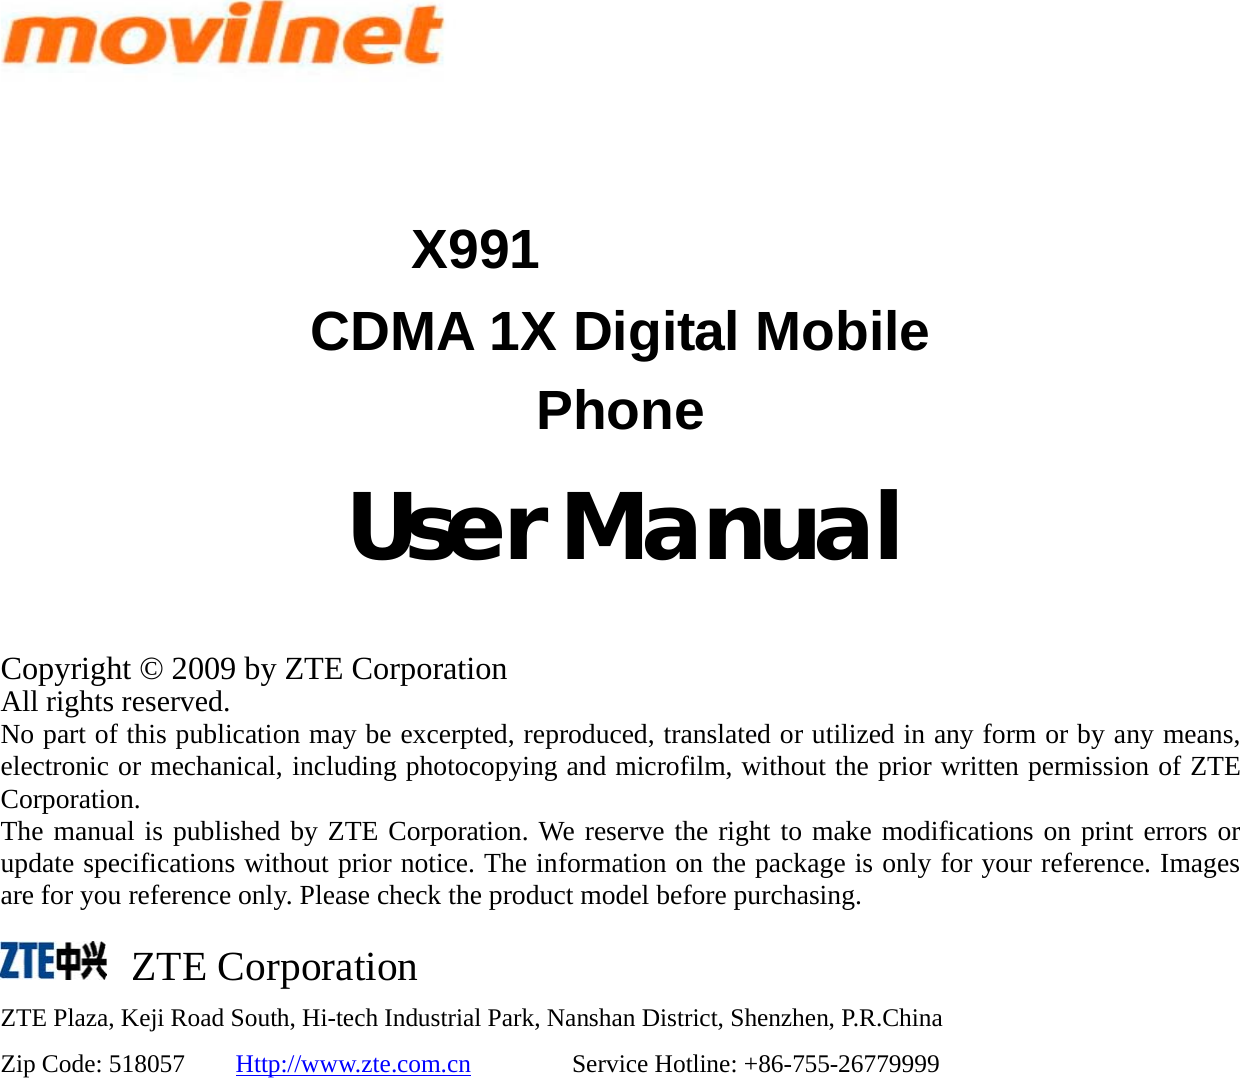    X991 CDMA 1X Digital Mobile Phone               User Manual  Copyright © 2009 by ZTE Corporation All rights reserved. No part of this publication may be excerpted, reproduced, translated or utilized in any form or by any means, electronic or mechanical, including photocopying and microfilm, without the prior written permission of ZTE Corporation. The manual is published by ZTE Corporation. We reserve the right to make modifications on print errors or update specifications without prior notice. The information on the package is only for your reference. Images are for you reference only. Please check the product model before purchasing.      ZTE Corporation ZTE Plaza, Keji Road South, Hi-tech Industrial Park, Nanshan District, Shenzhen, P.R.China Zip Code: 518057    Http://www.zte.com.cn        Service Hotline: +86-755-26779999 